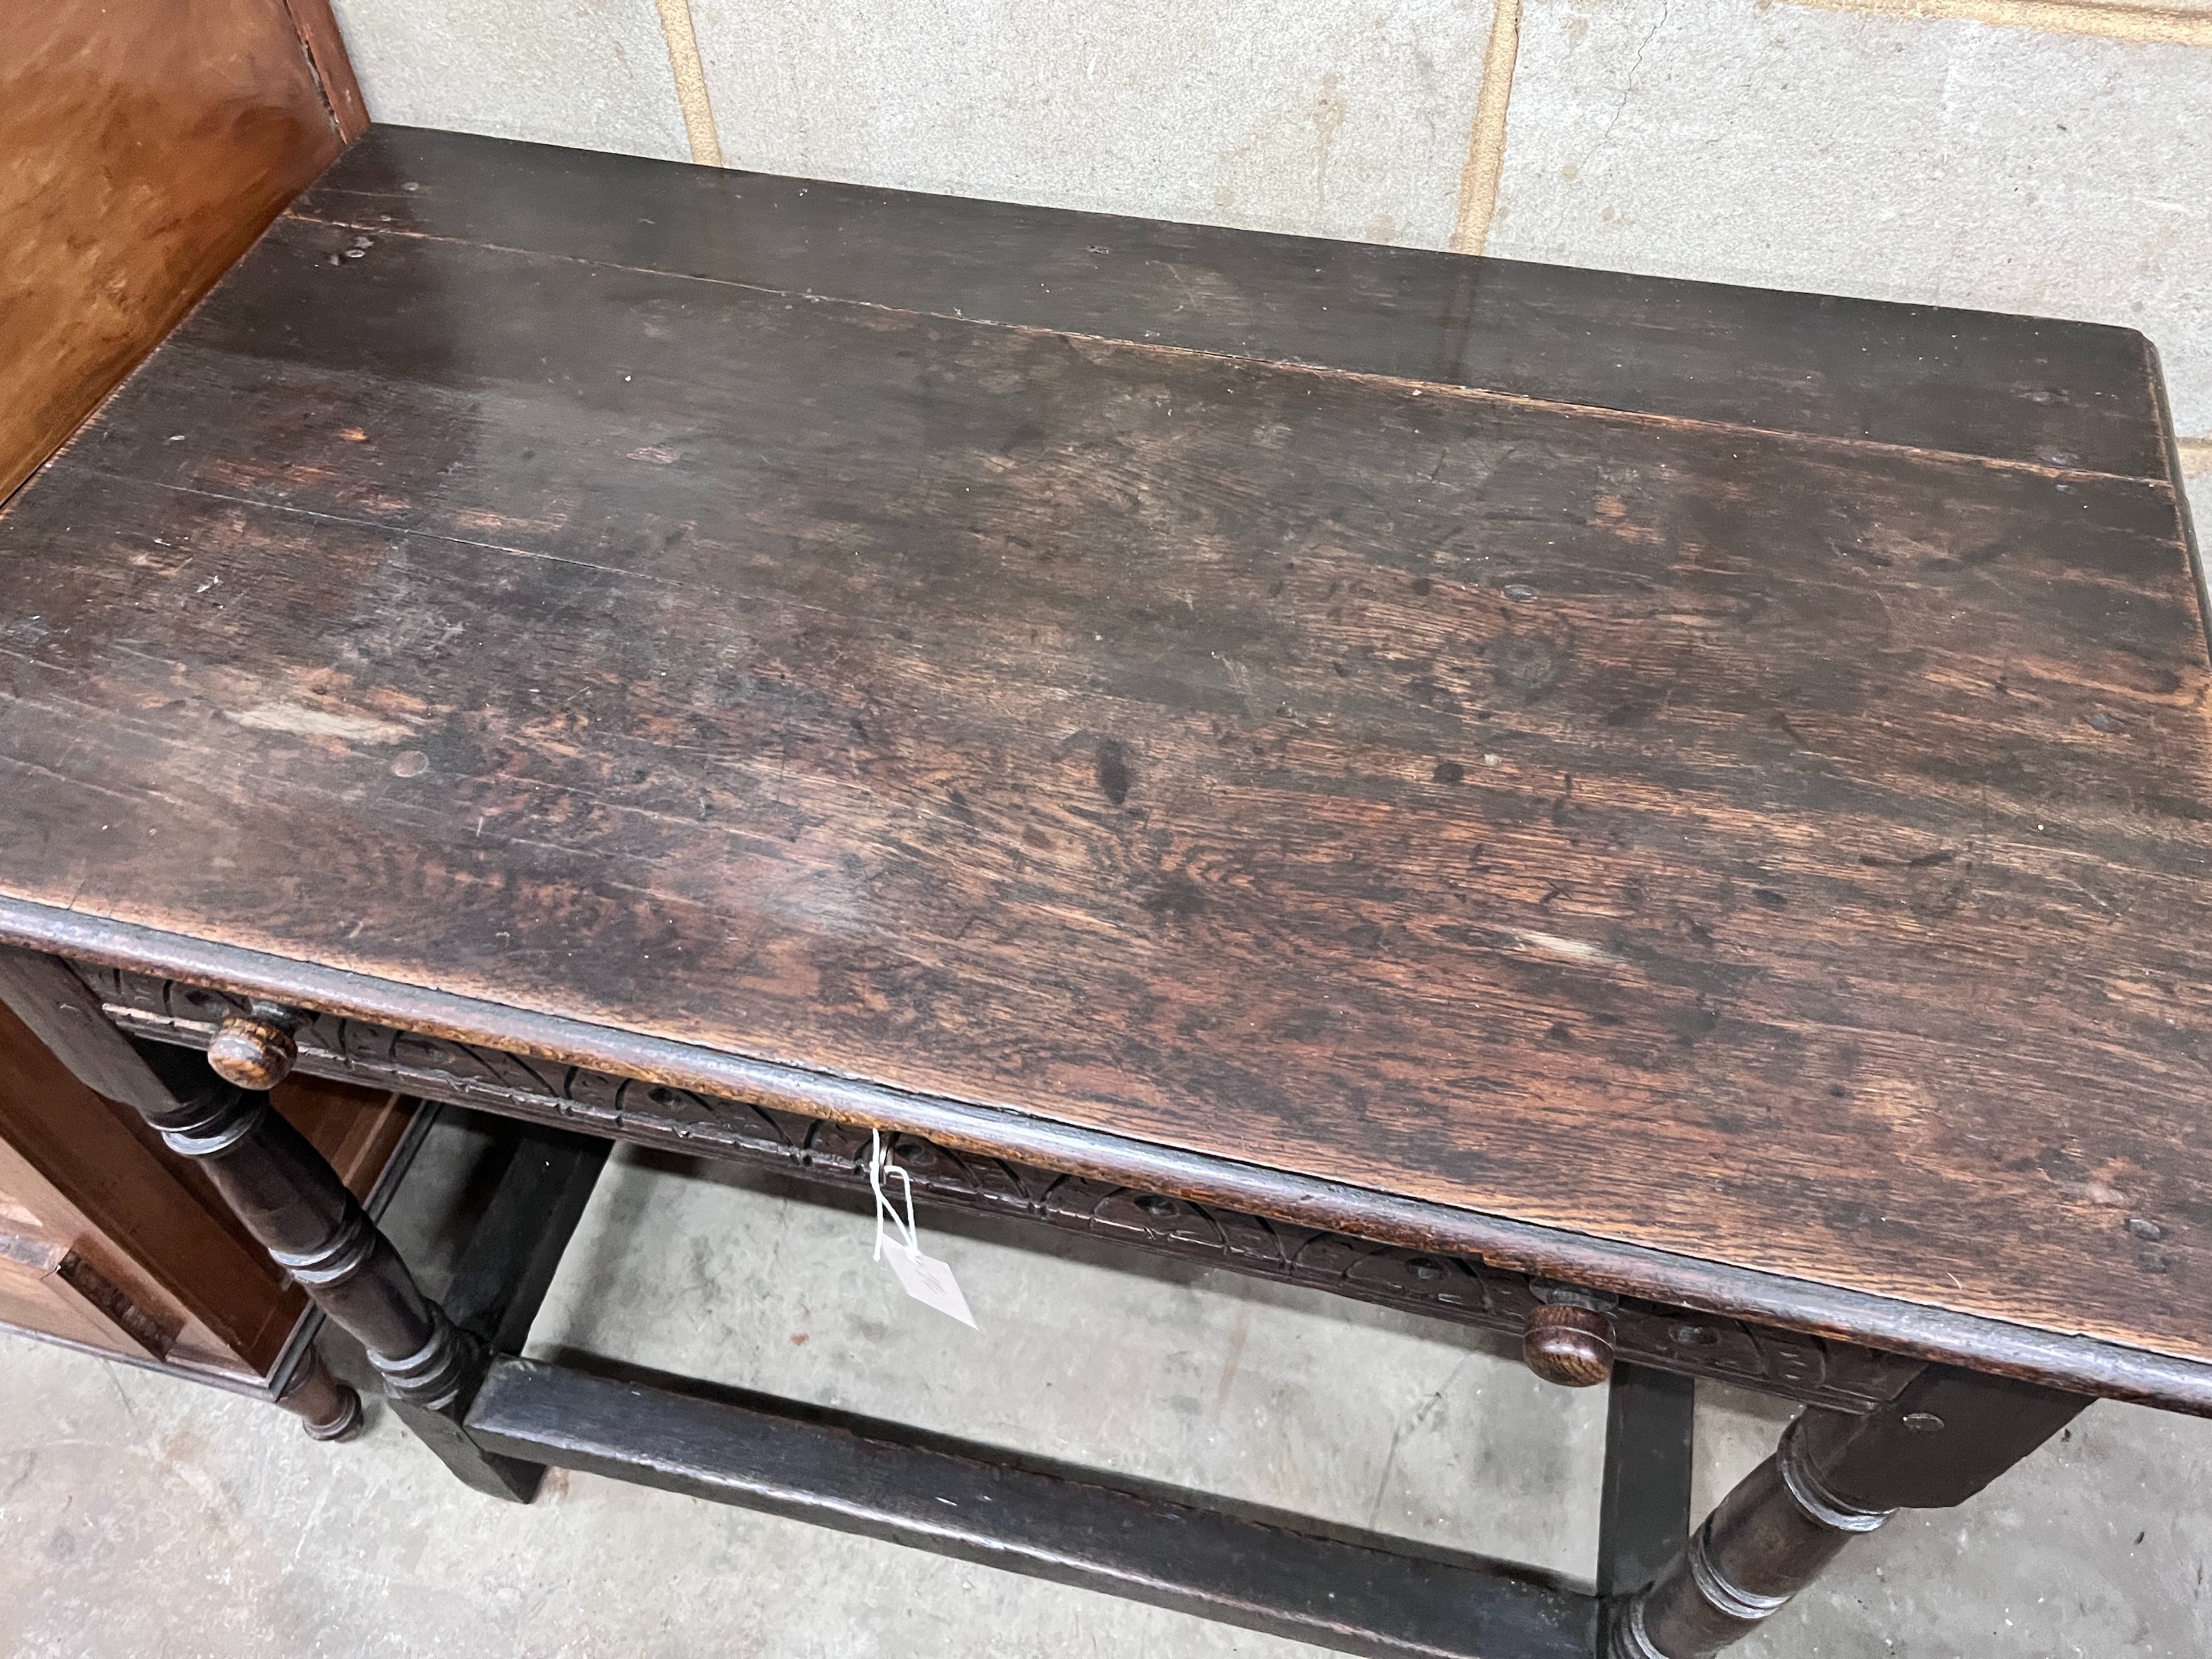 A 17th century style oak side table, width 100cm *Please note the sale commences at 9am.